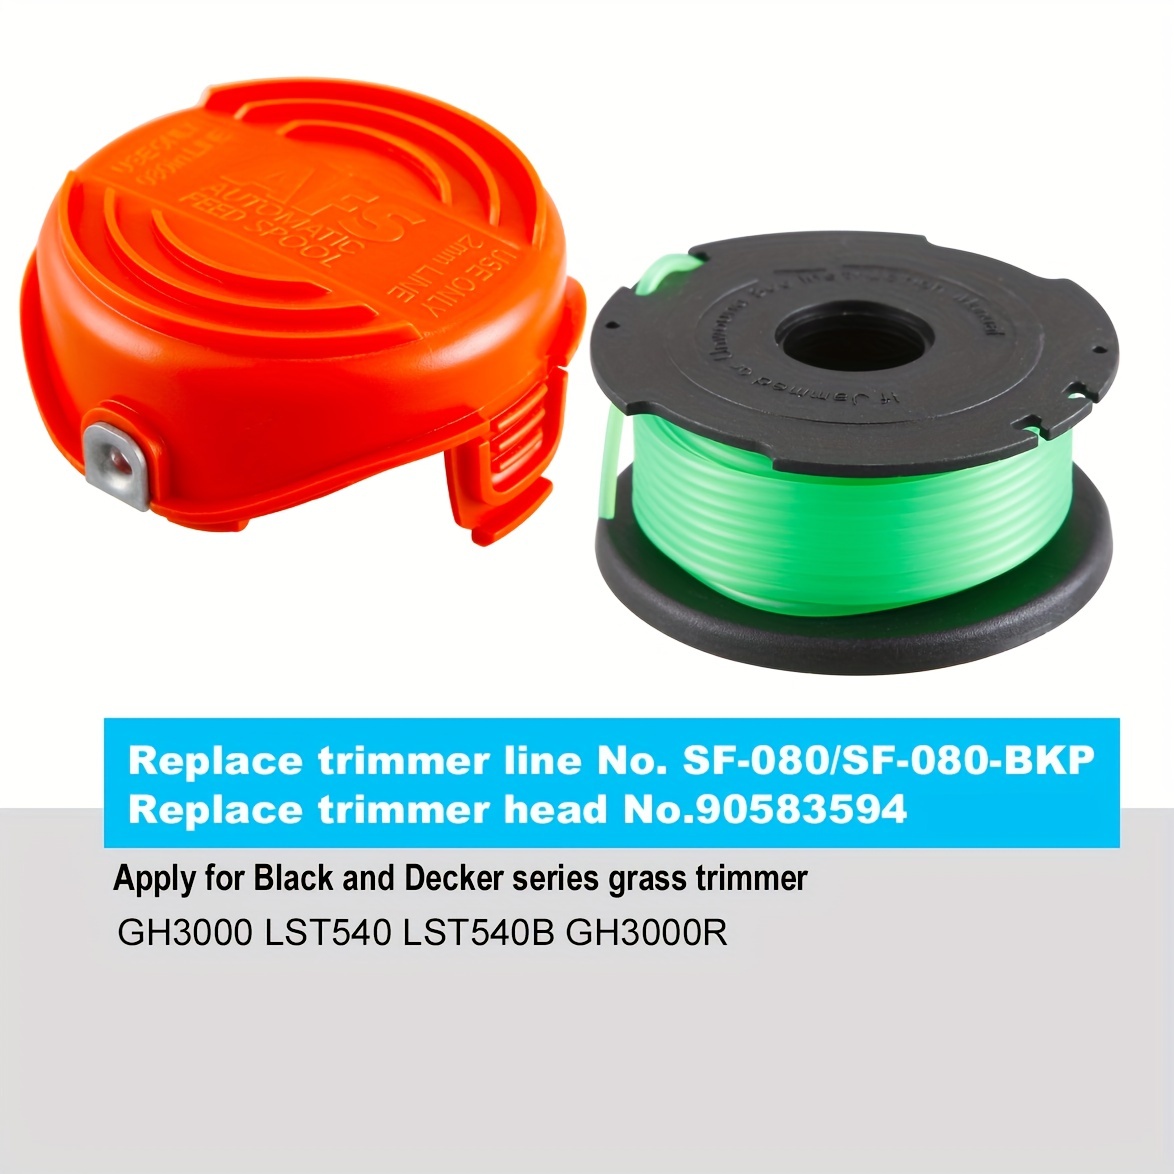 SF-080 Replacement Spool, SF 080 trimmer,20ft 0.080 inch for Black and  Decker GH3000 LST540 LST540B GH3000R SF-080-BKP Auto Feed Spool Single Line